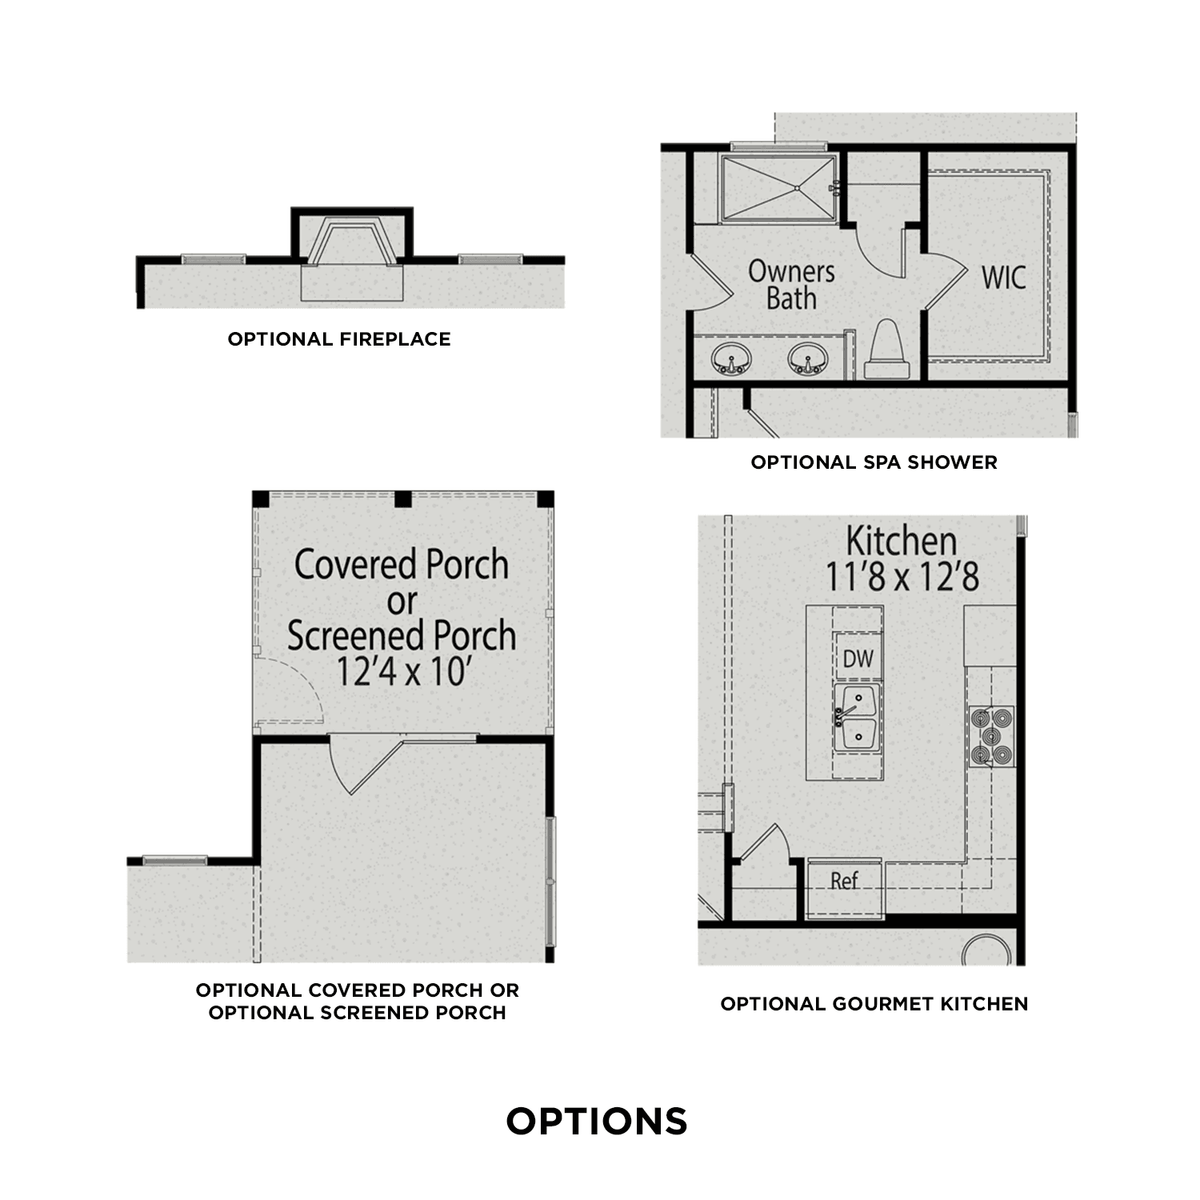 3 - The Oak C floor plan layout for 440 Forestview Crest Way in Davidson Homes' Highland Forest community.